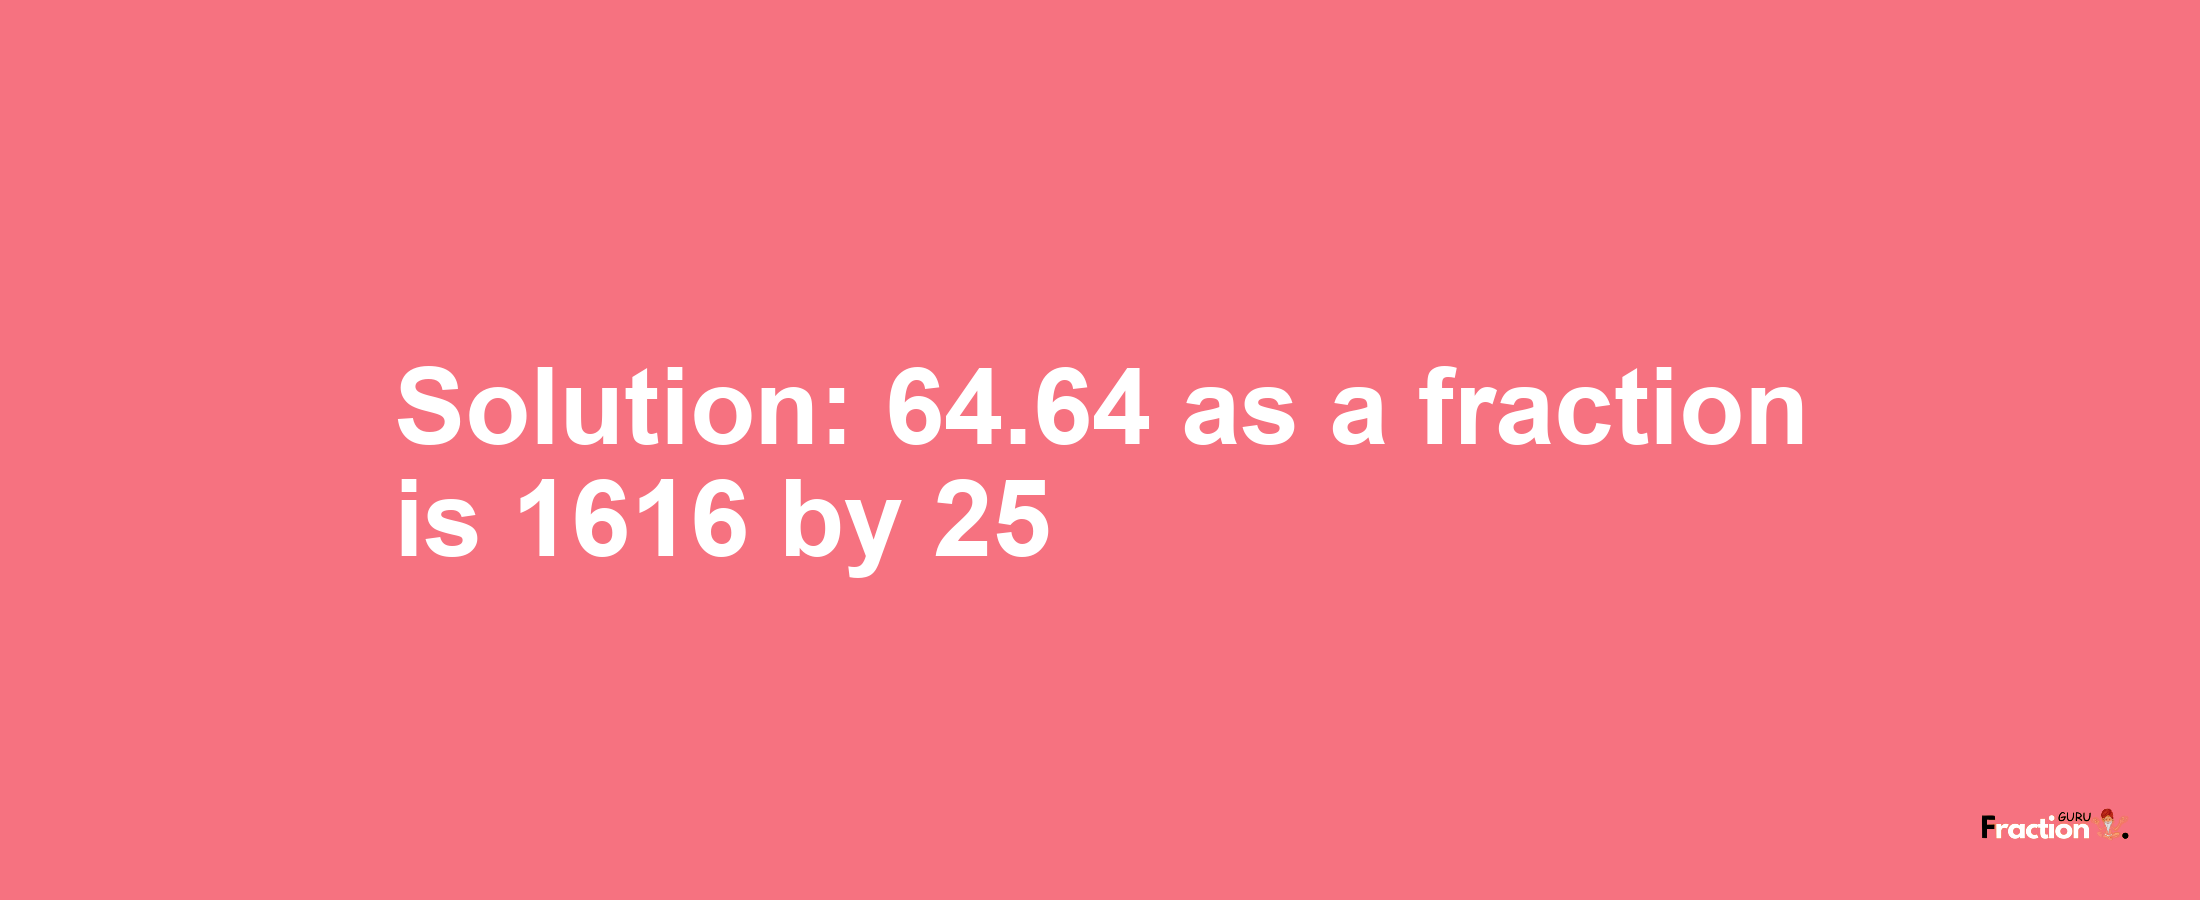 Solution:64.64 as a fraction is 1616/25